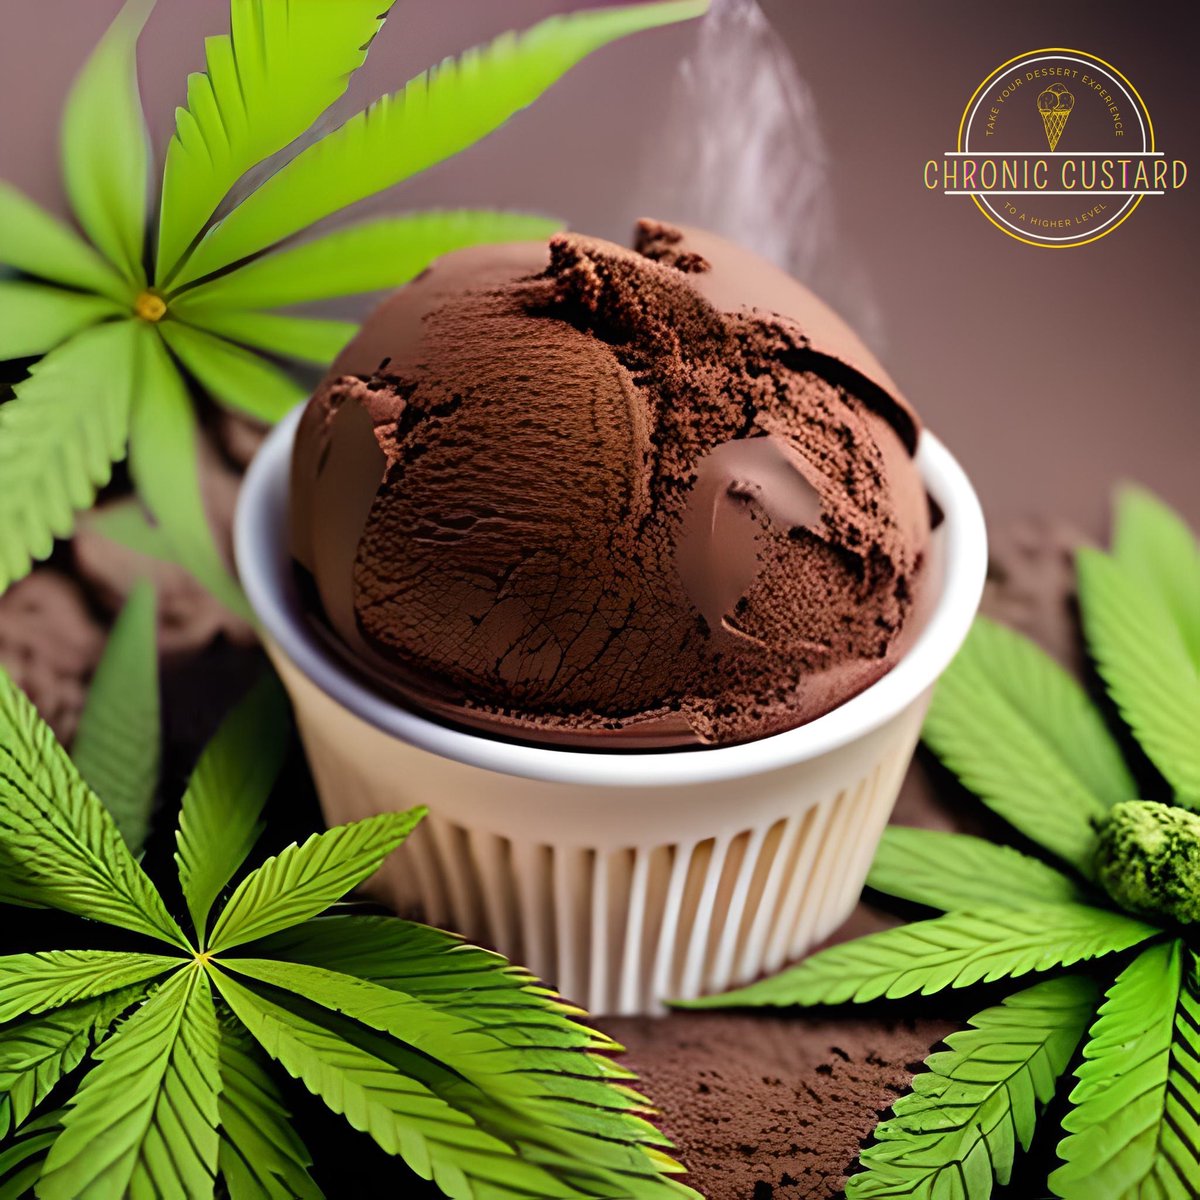 Satisfy your sweet tooth with our Cocoa Euphoria ice cream 🍫🌿 Made with finest ingredients and cannabis-infused for a unique experience. Perfect for unwinding or celebrating, follow us for updates on our upcoming launch. #CannabisIceCream #InfusedDesserts #Chocolate #thc